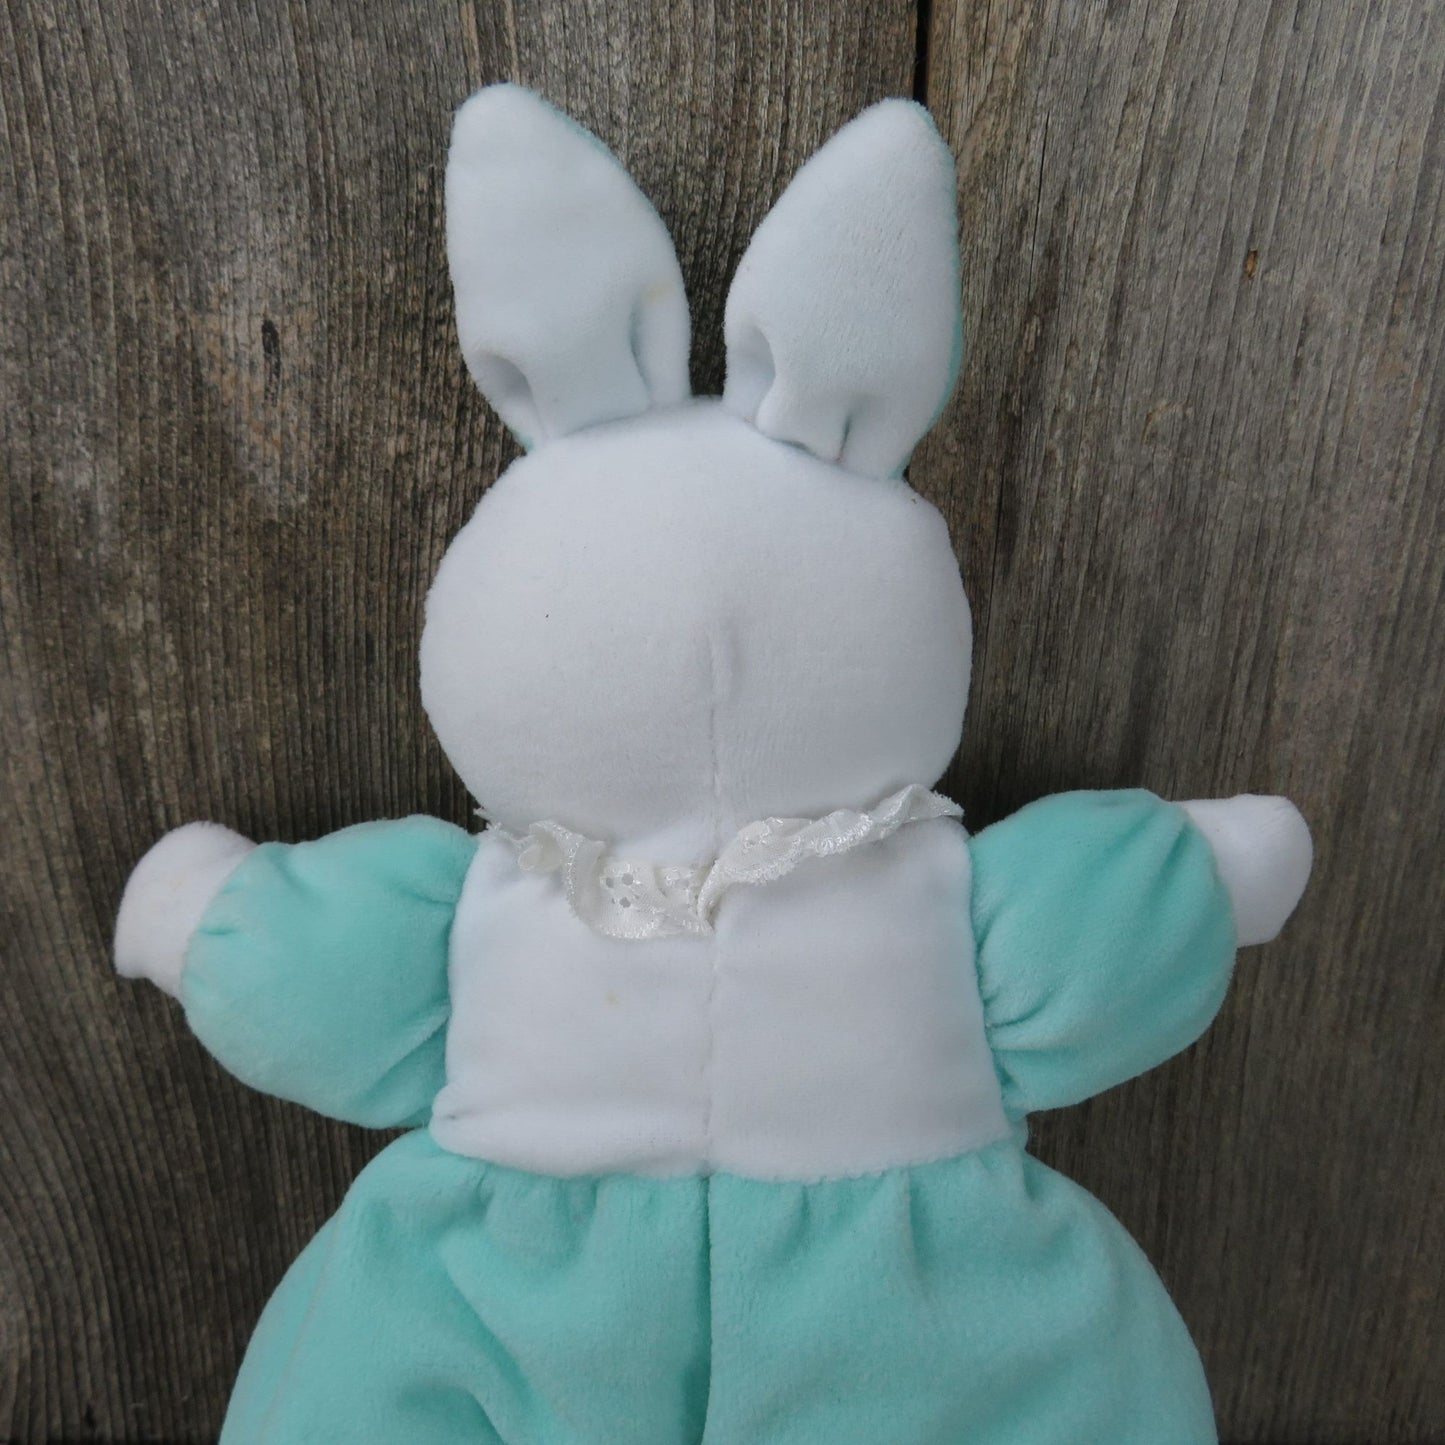 My First Bunny Plush Rattle Green White Velour Rabbit Baby Connection Stuffed Animal